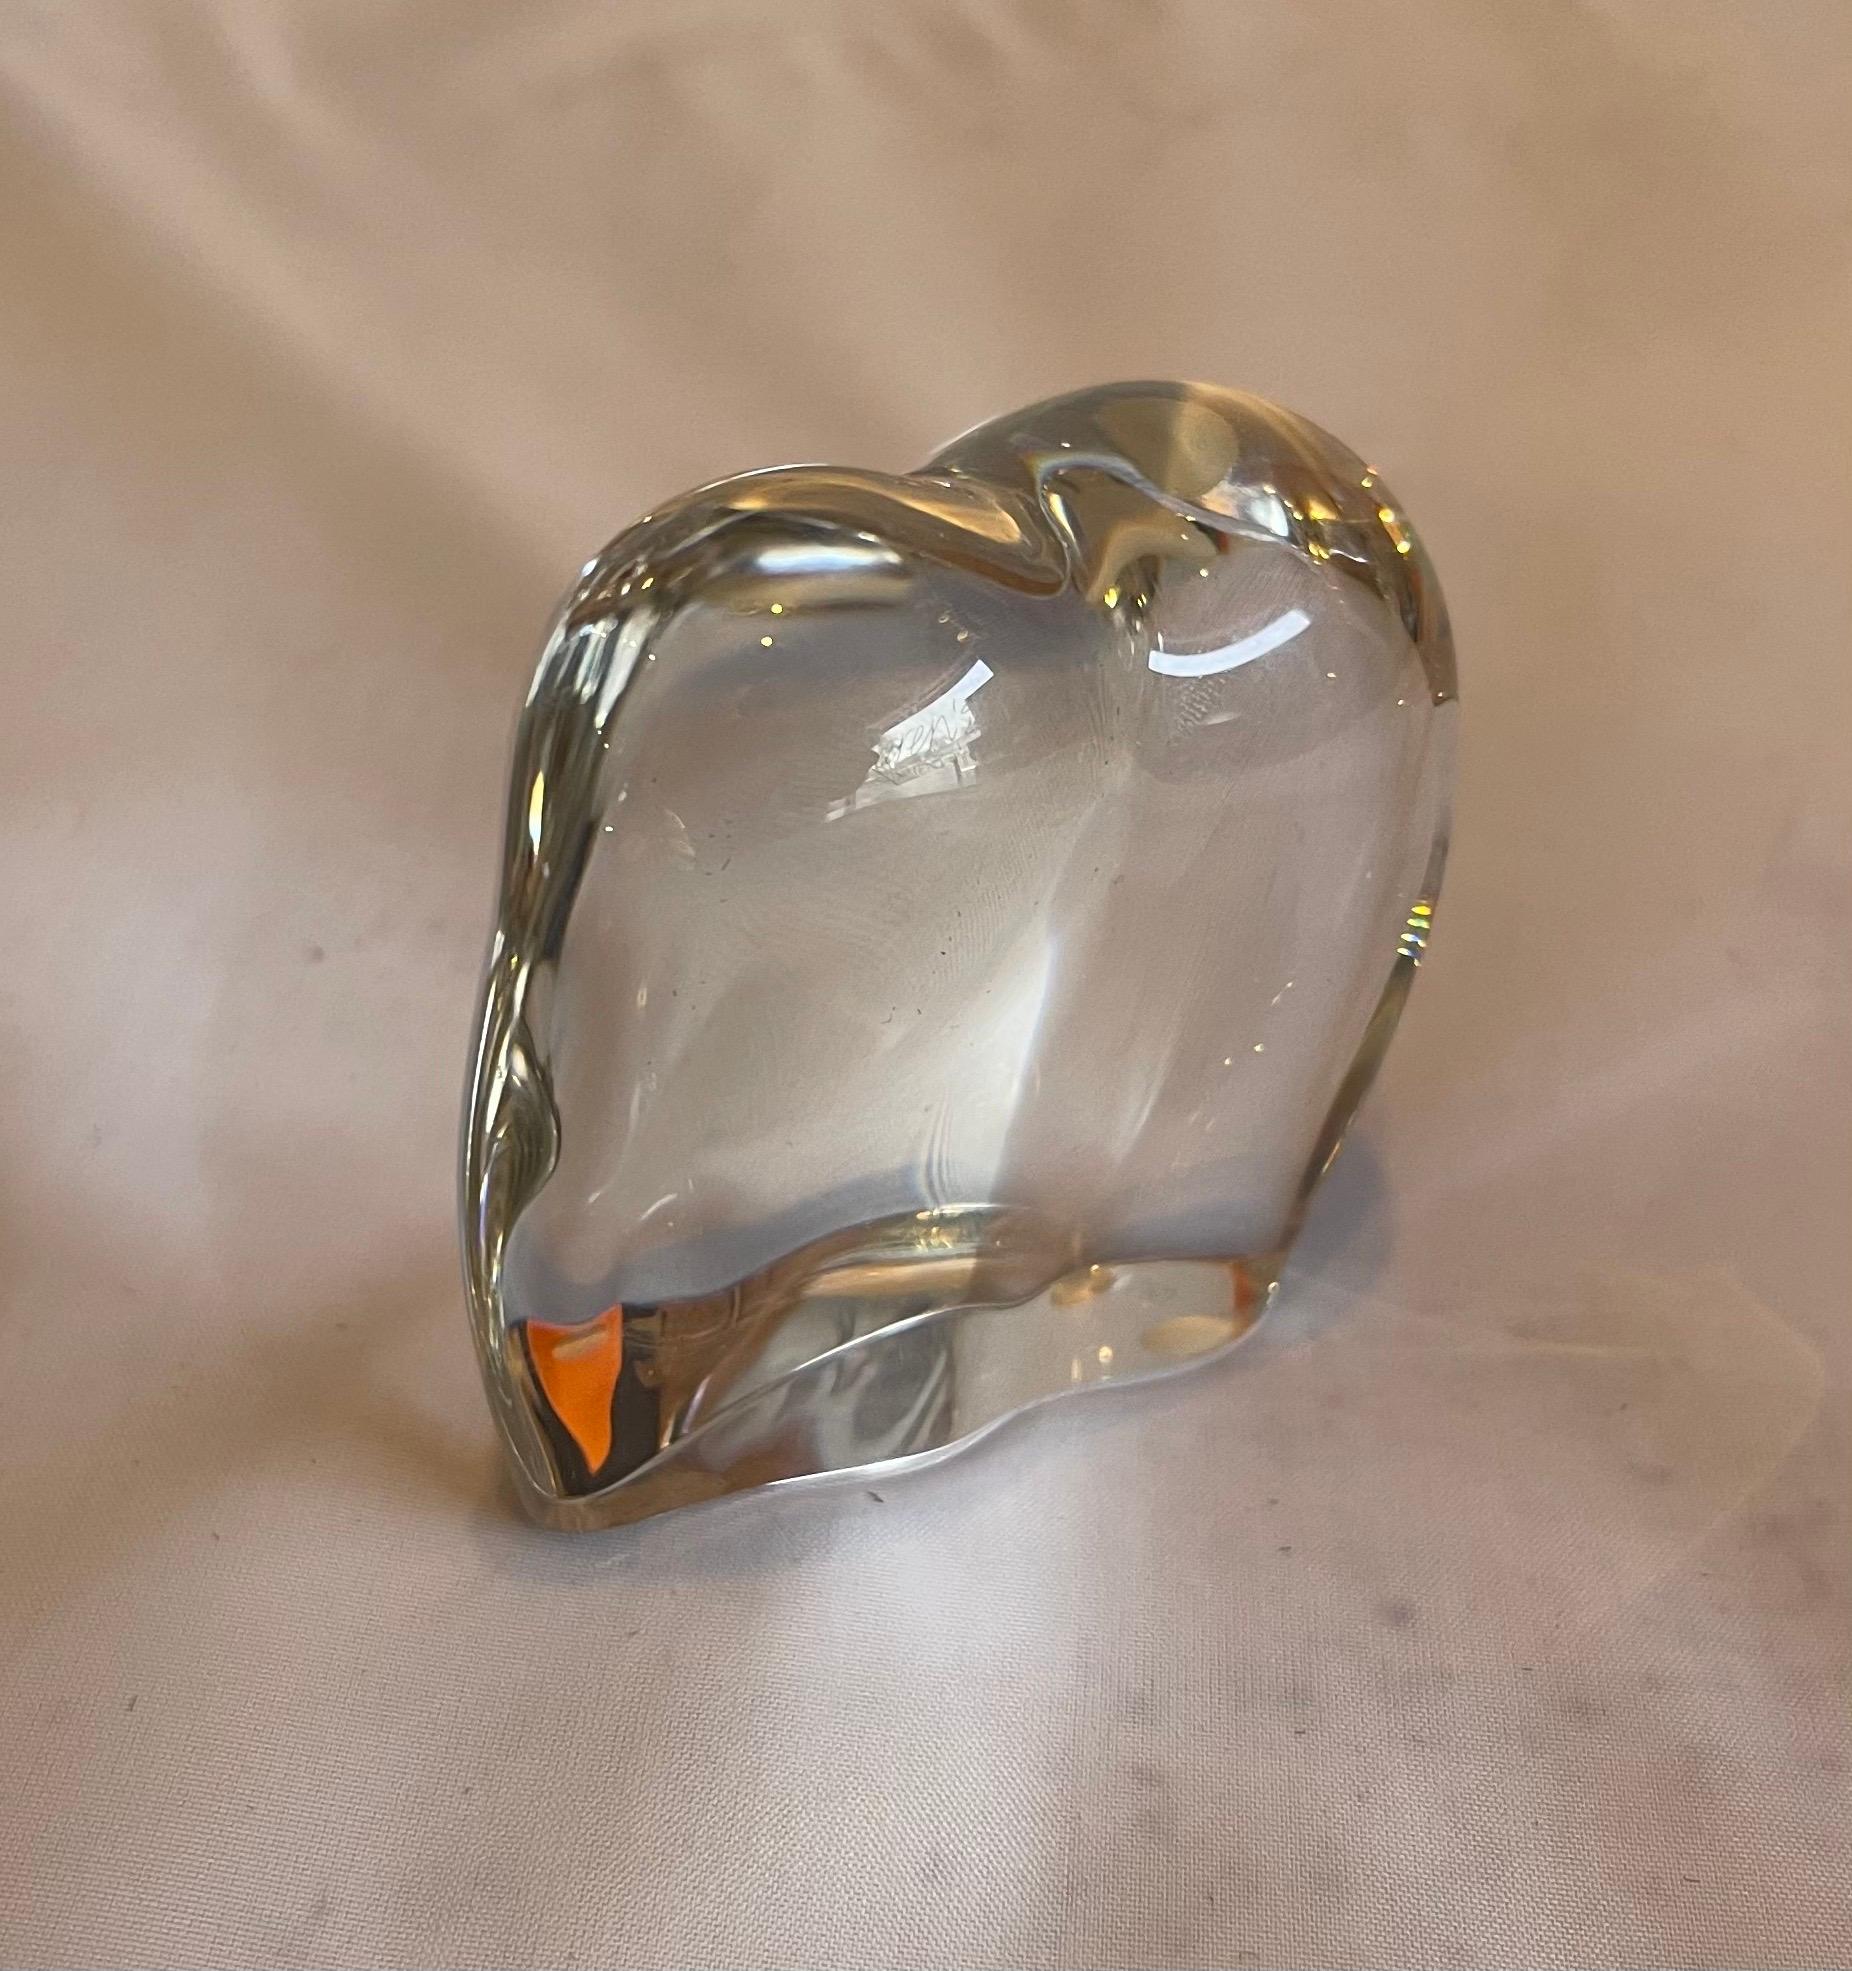 French Stylized Crystal Elephant Sculpture or Paperweight by Baccarat